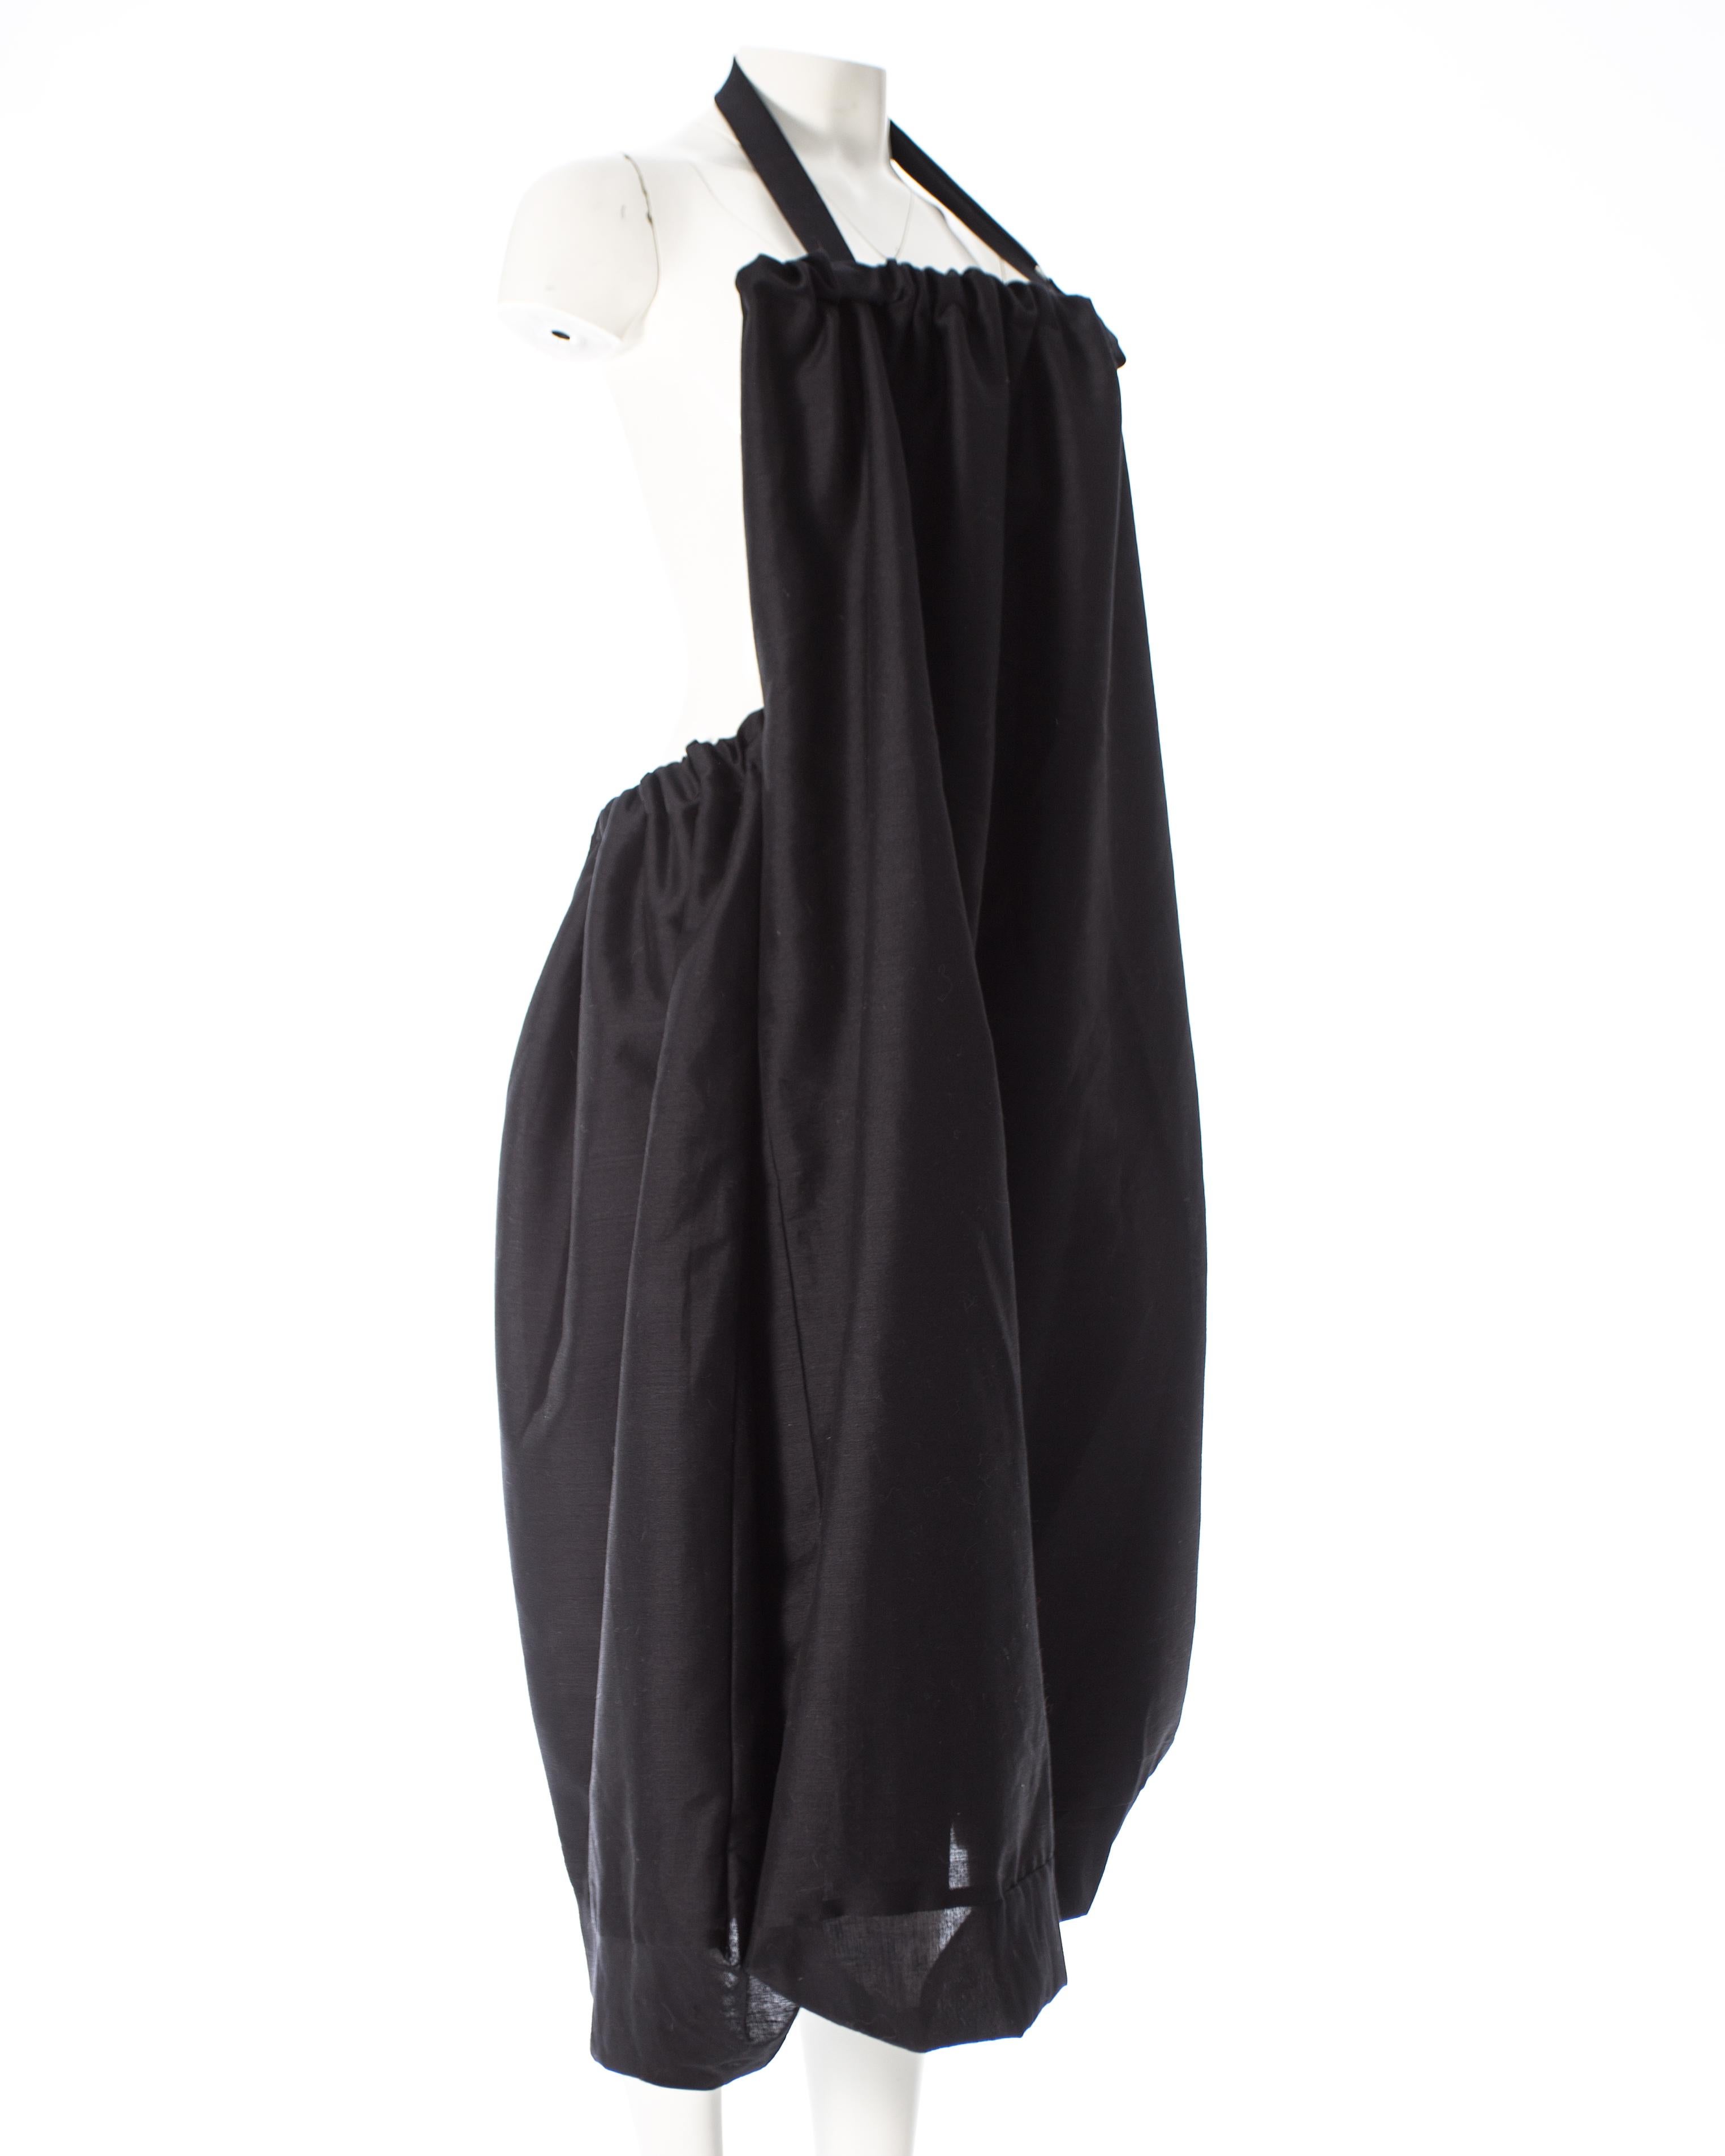 - Full skirt with bubble hem and irregular seams 
- Internal functional bag with ruched closure and adjustable shoulder strap
- Transforms into a dress or shoulder bag 

Spring-Summer 2001